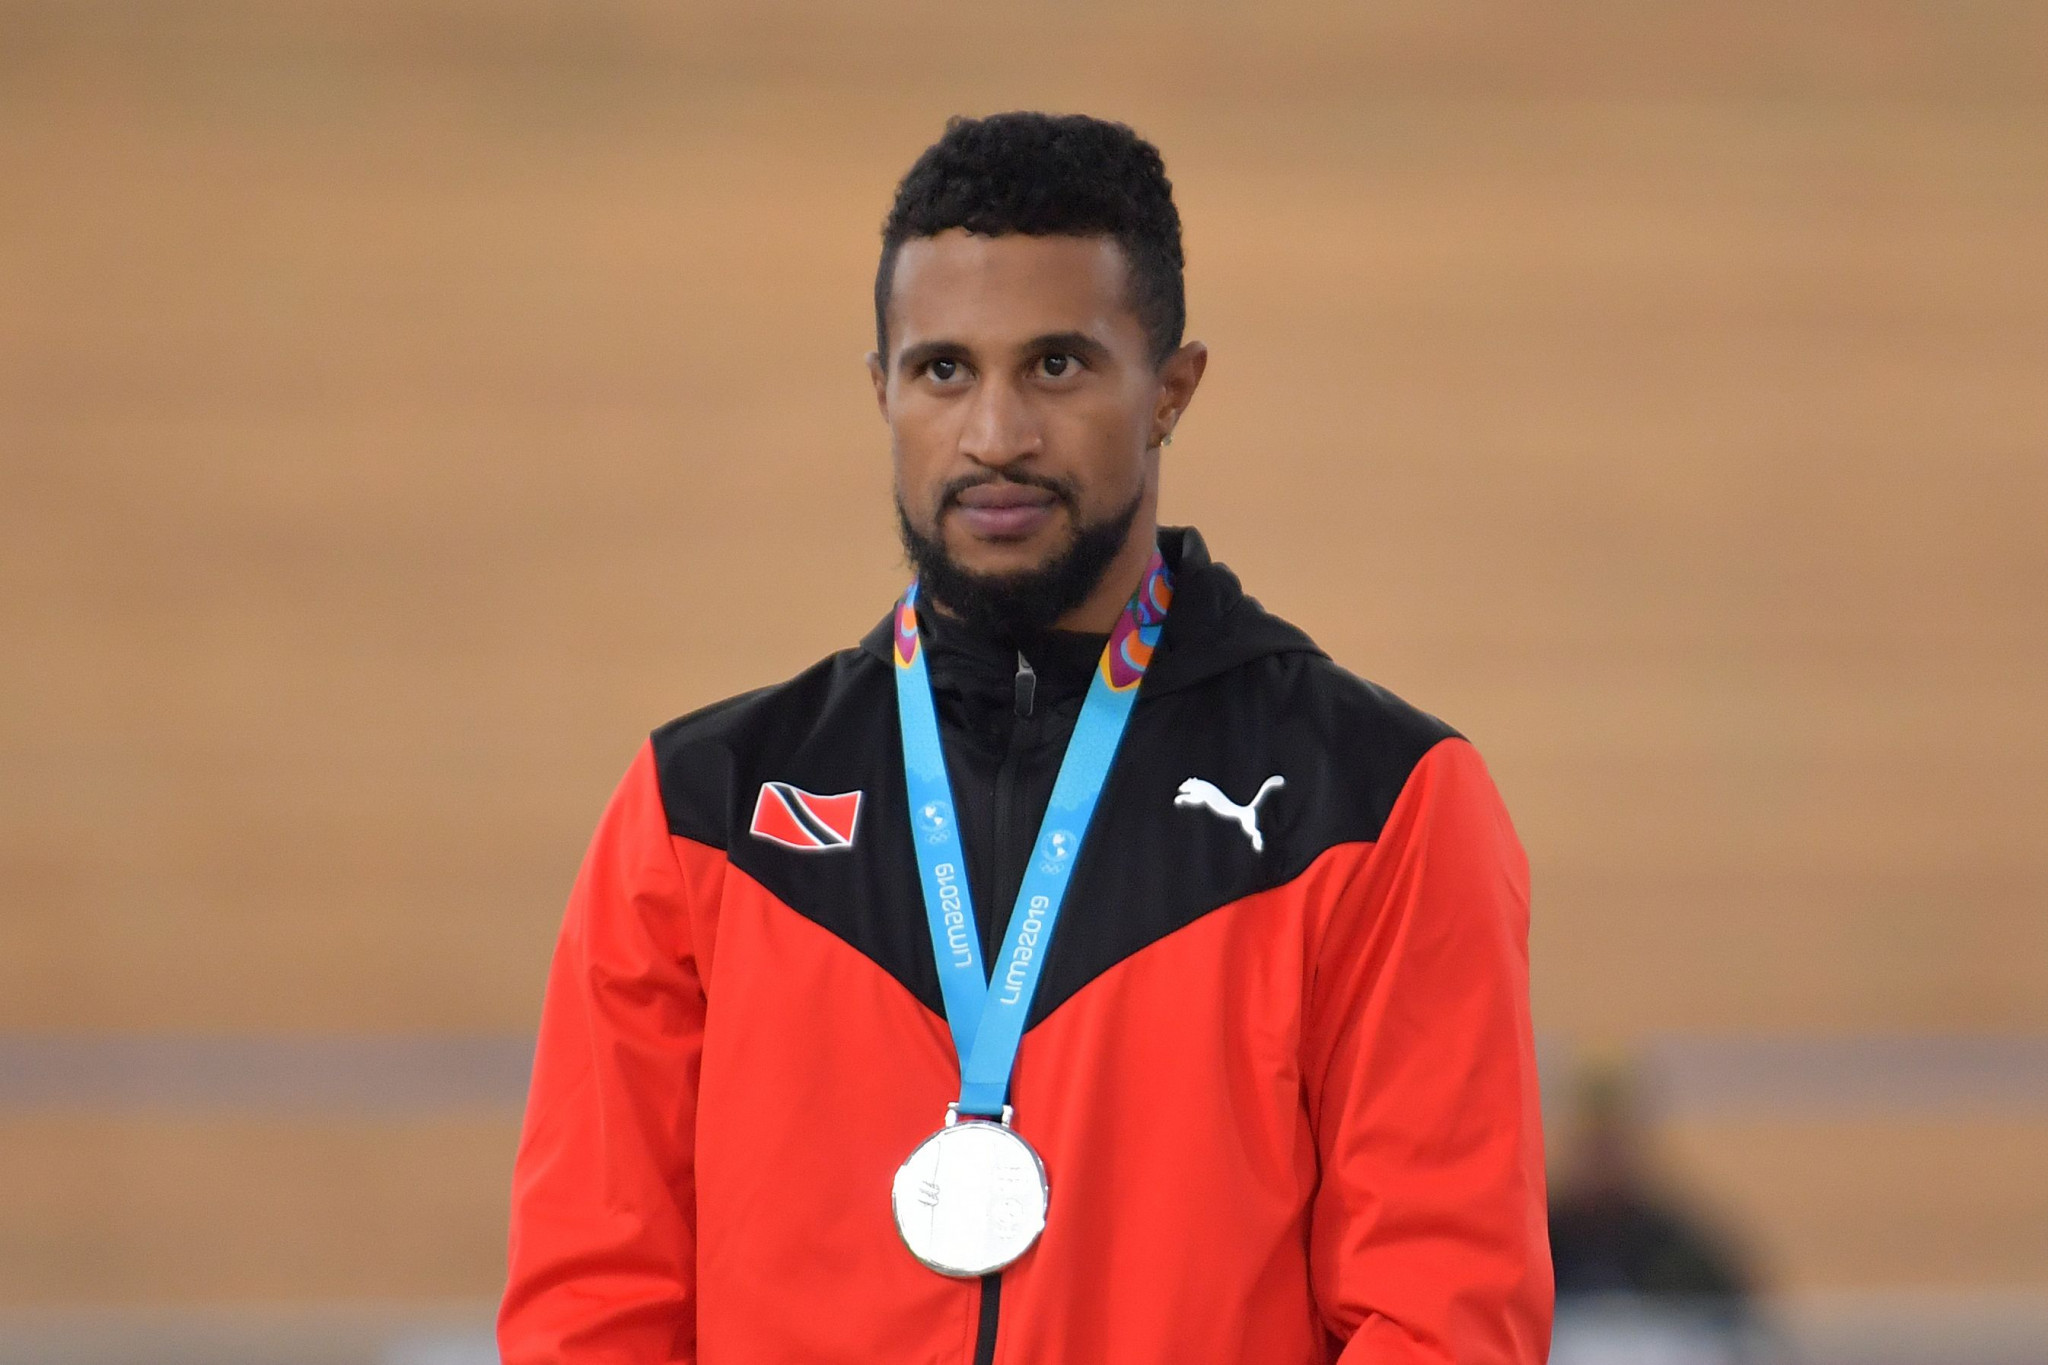 Njisane Phillip earned two medals at the Lima 2019 Pan American Games, but his results have now been disqualified ©Getty Images